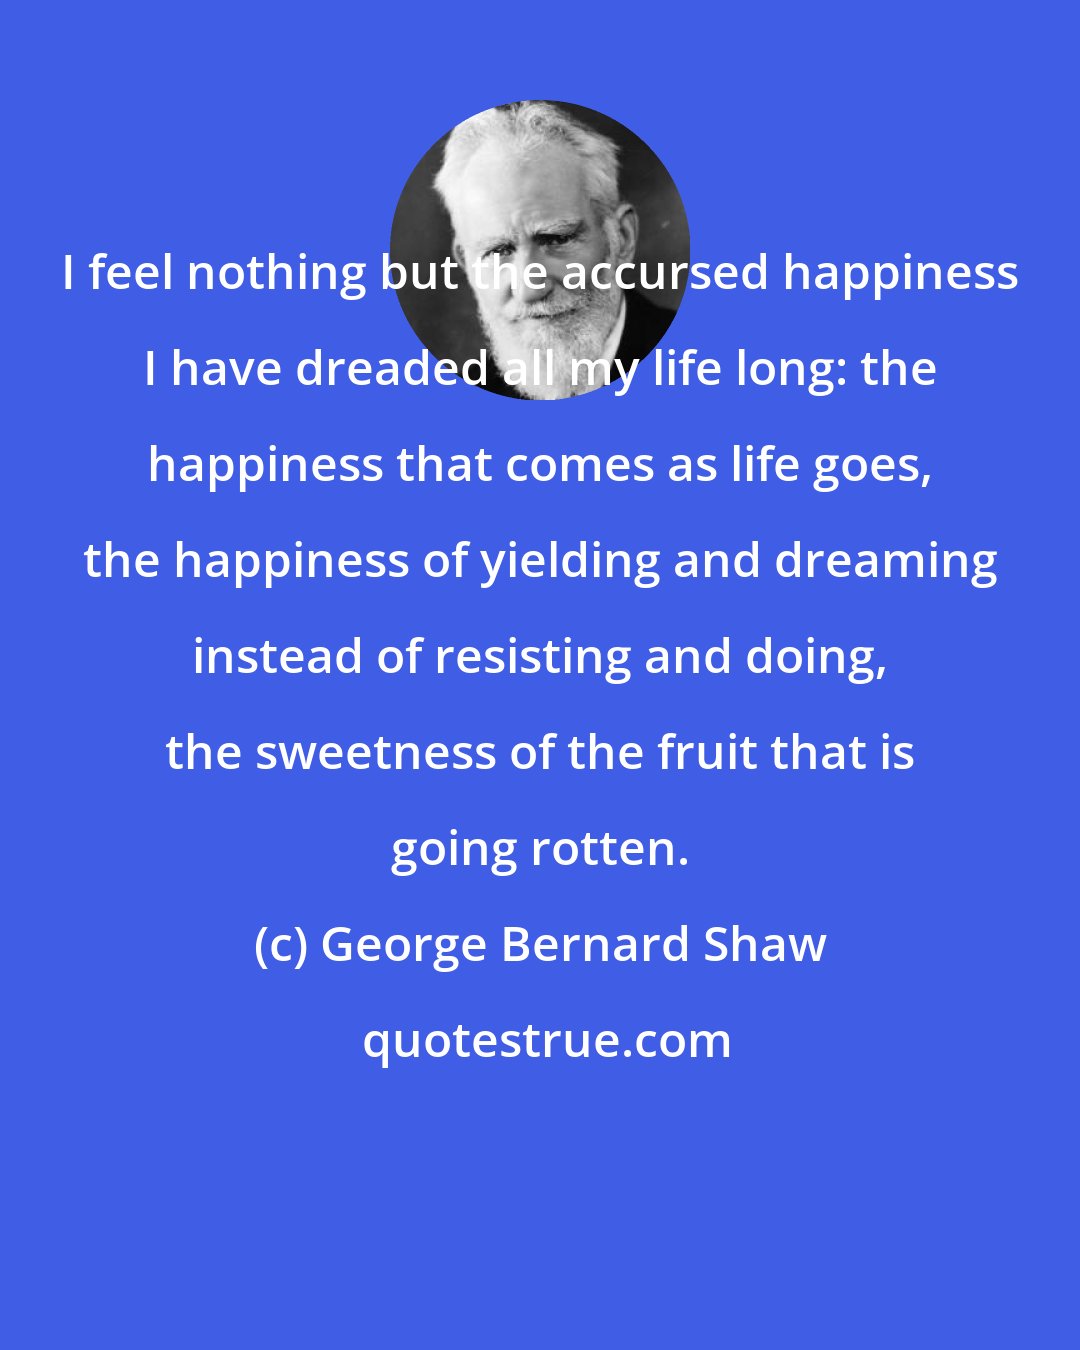 George Bernard Shaw: I feel nothing but the accursed happiness I have dreaded all my life long: the happiness that comes as life goes, the happiness of yielding and dreaming instead of resisting and doing, the sweetness of the fruit that is going rotten.